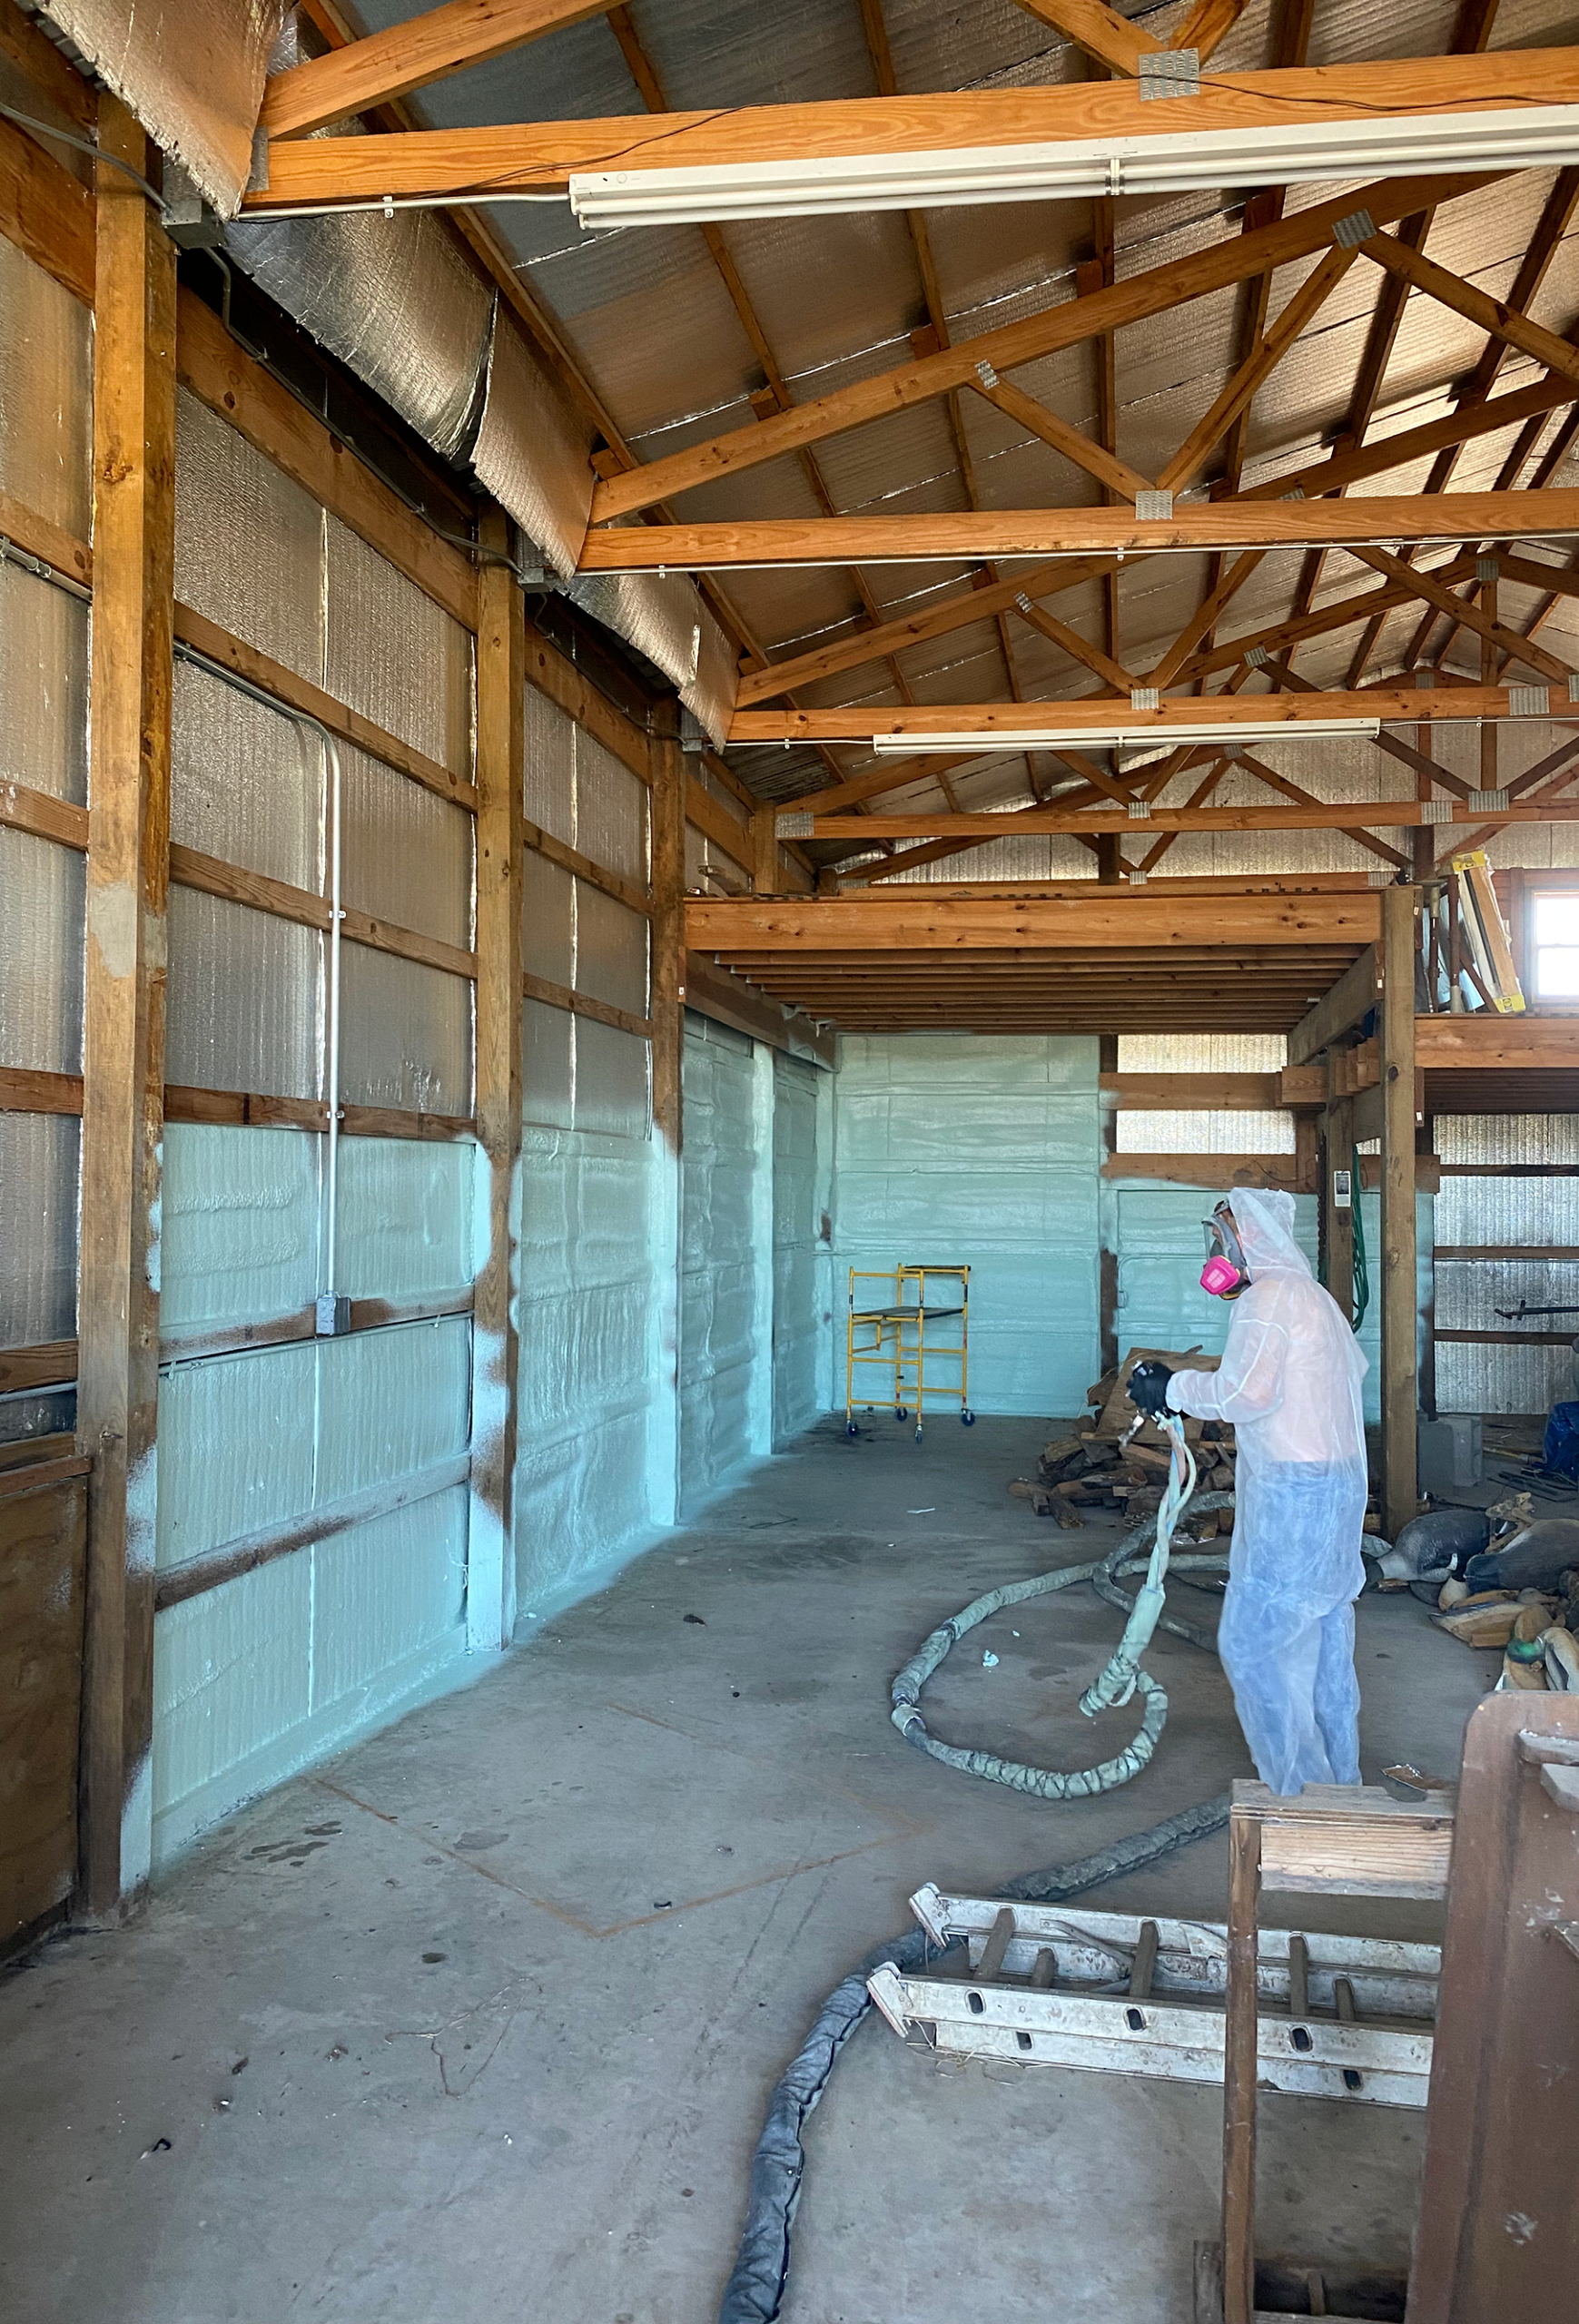 Install Spray Foam Insulation With DK Spray Foam & Insulation in Mexico, MO. Call Our Contractors.